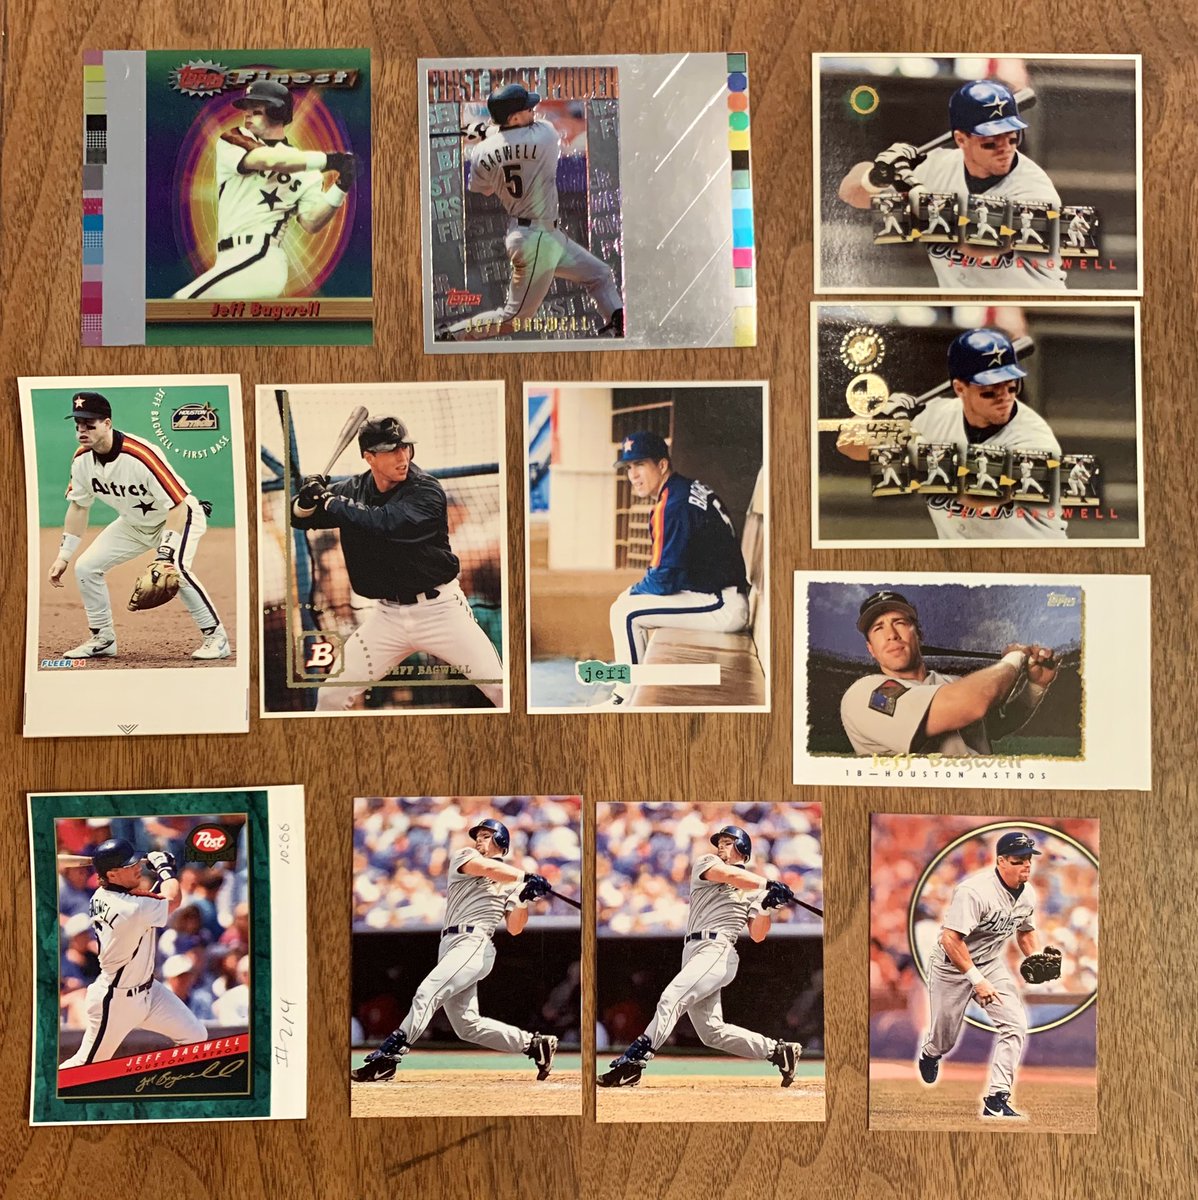 And last, but certainly not least: the pack teased at the top of this thread. A grip of Astros proofs that I scored cheap. Some without foil, some with backs, some naked Stadium Club proofs, one of those no-foil 1992 Topps Gold cards of my man Casey Candaele. Lots to love.